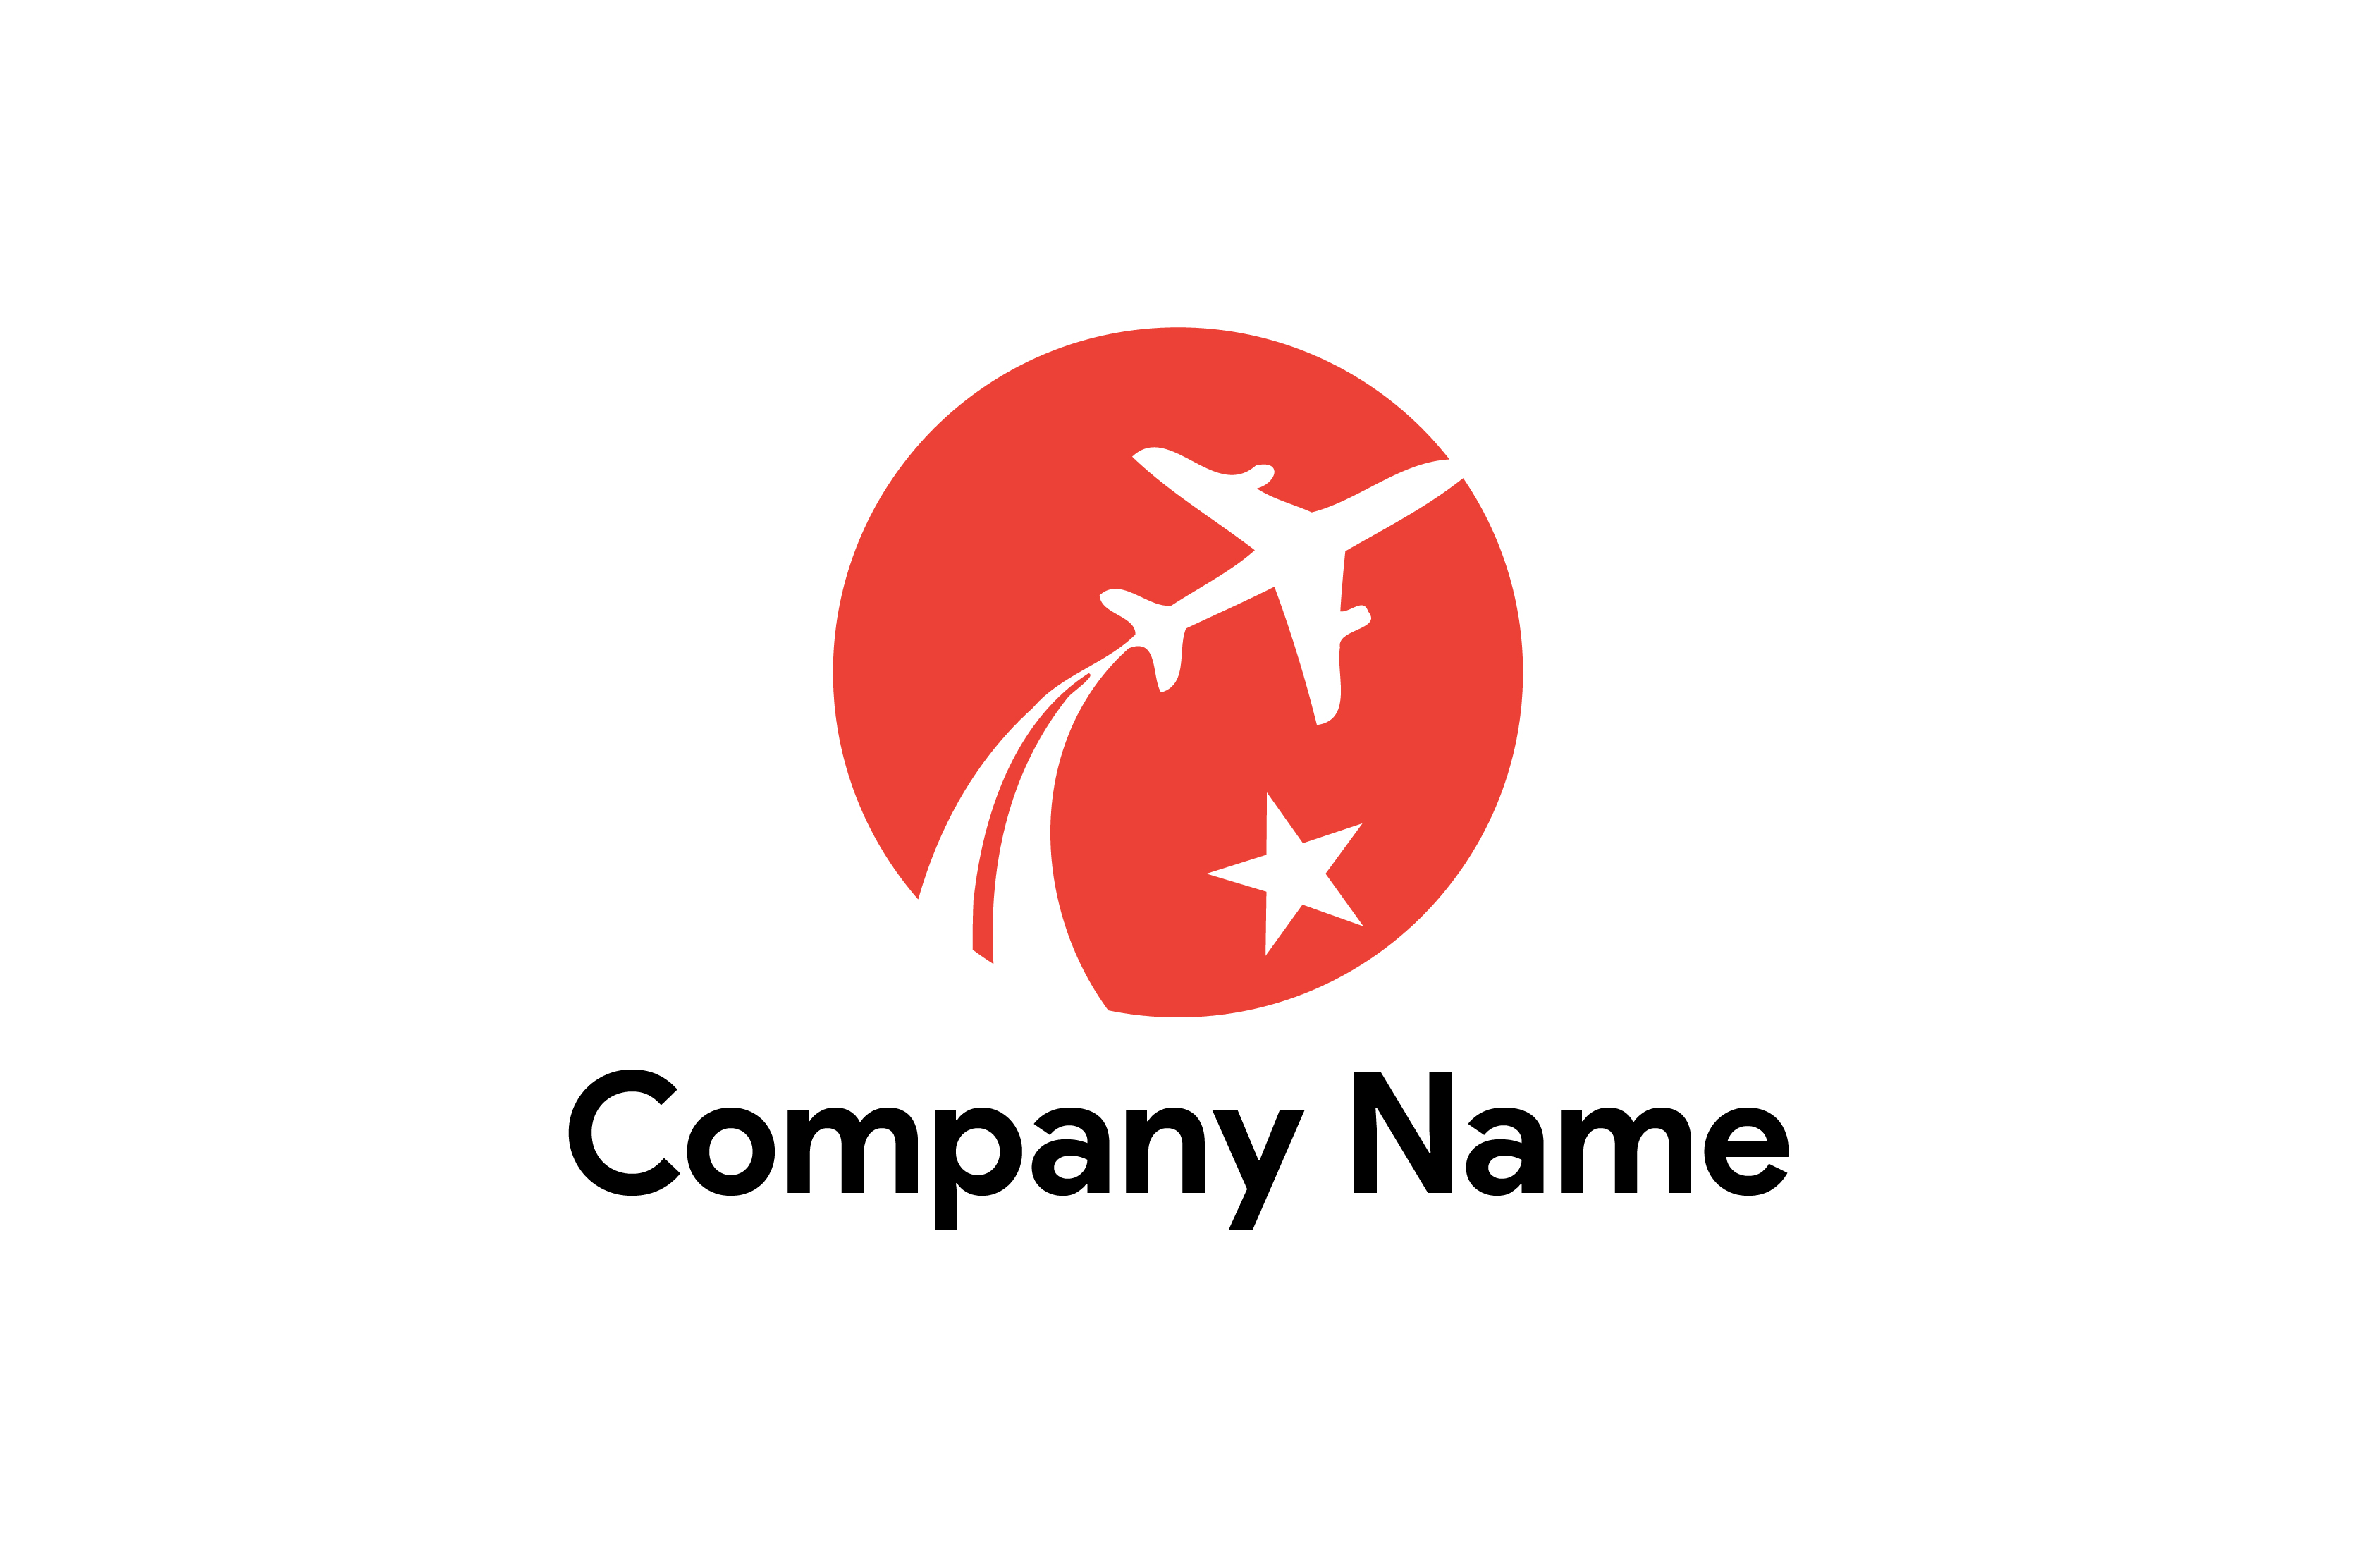 red airline logos with names